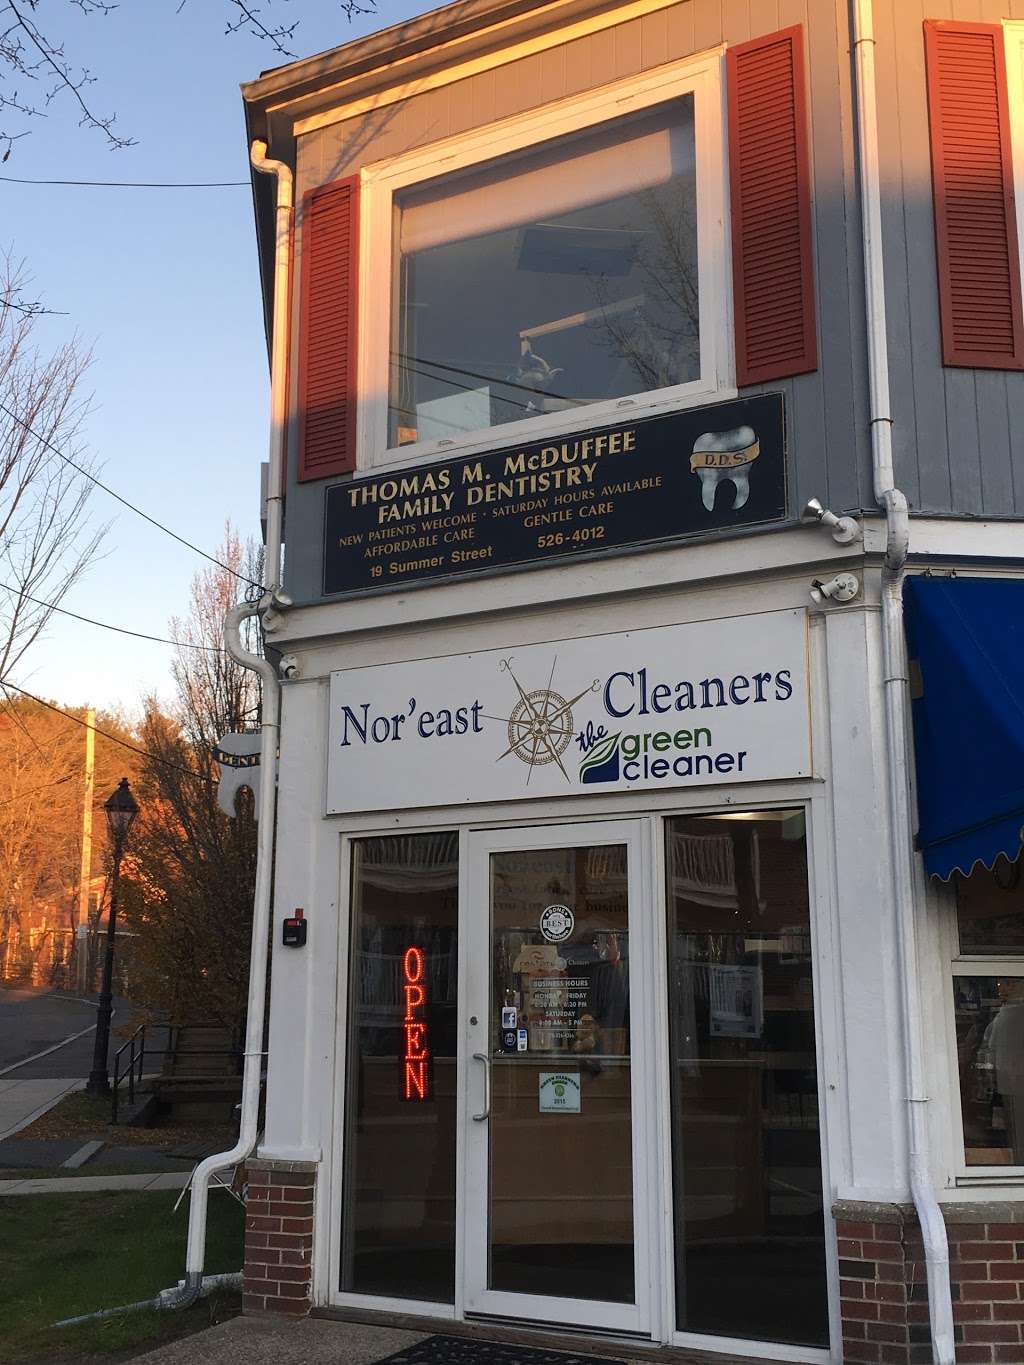 Noreast Cleaners | 15 Summer St, Manchester-by-the-Sea, MA 01944 | Phone: (978) 526-4266